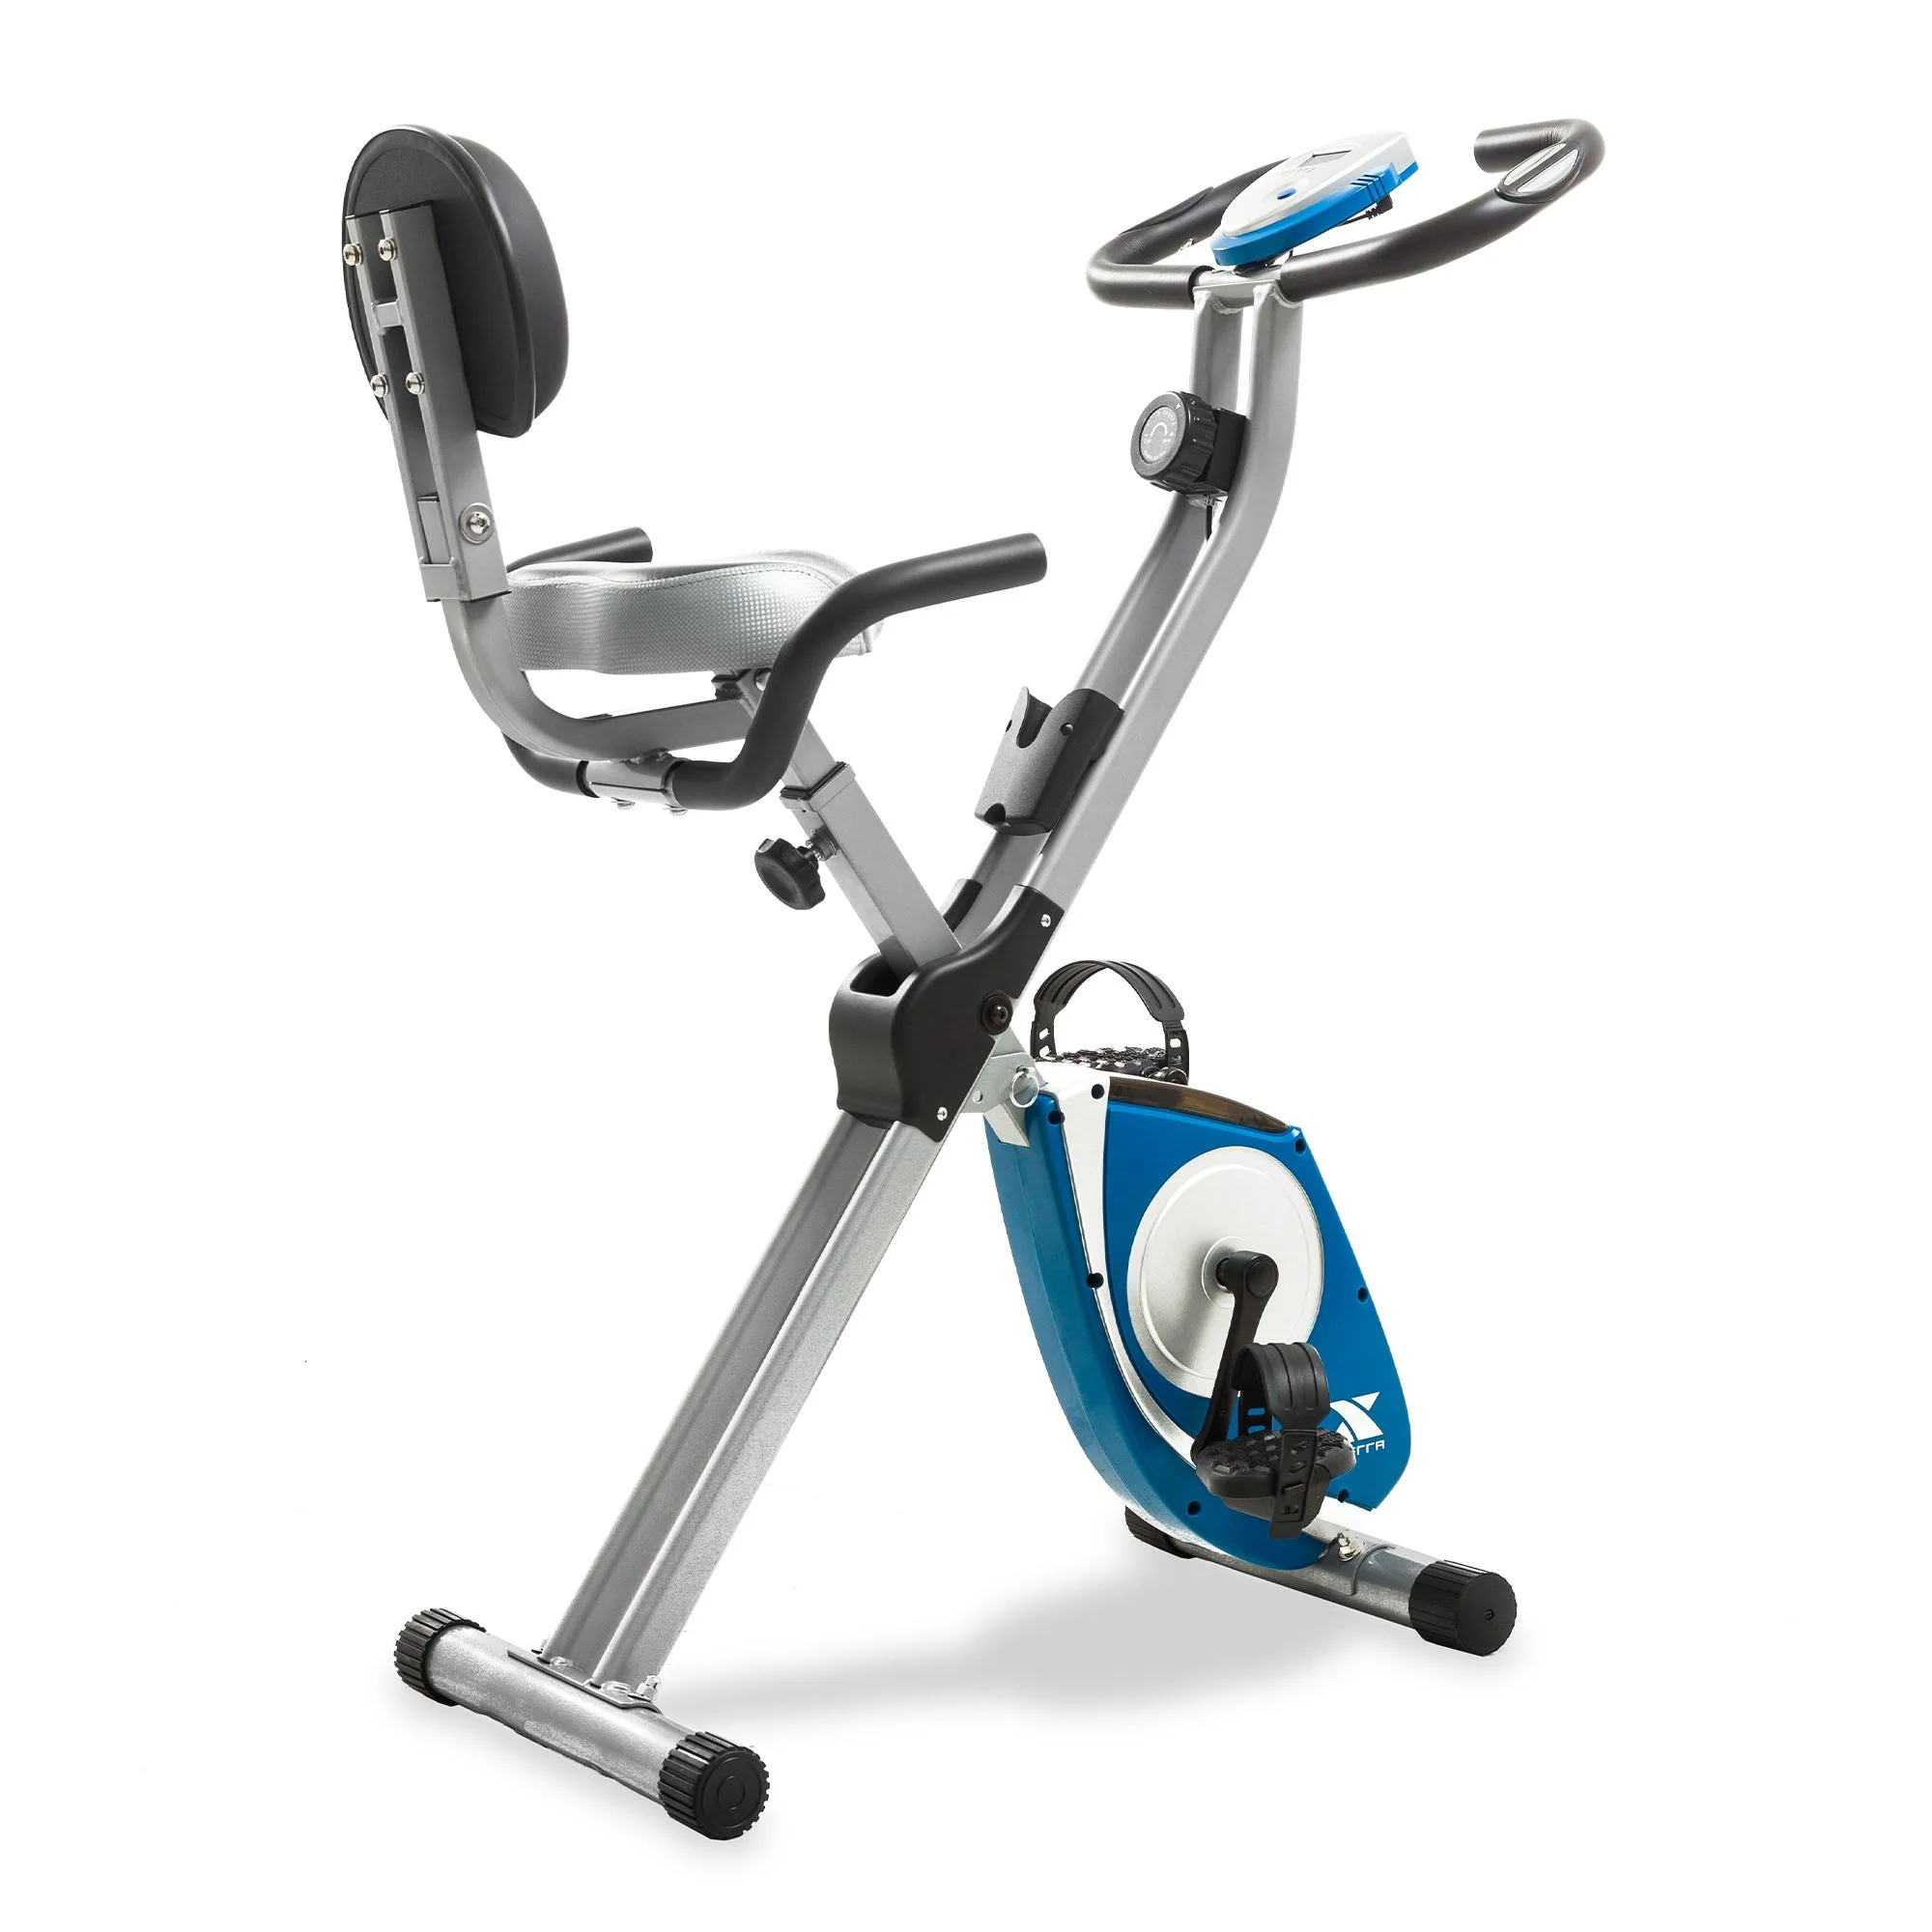 Review of the XTERRA Fitness Folding Exercise Bike